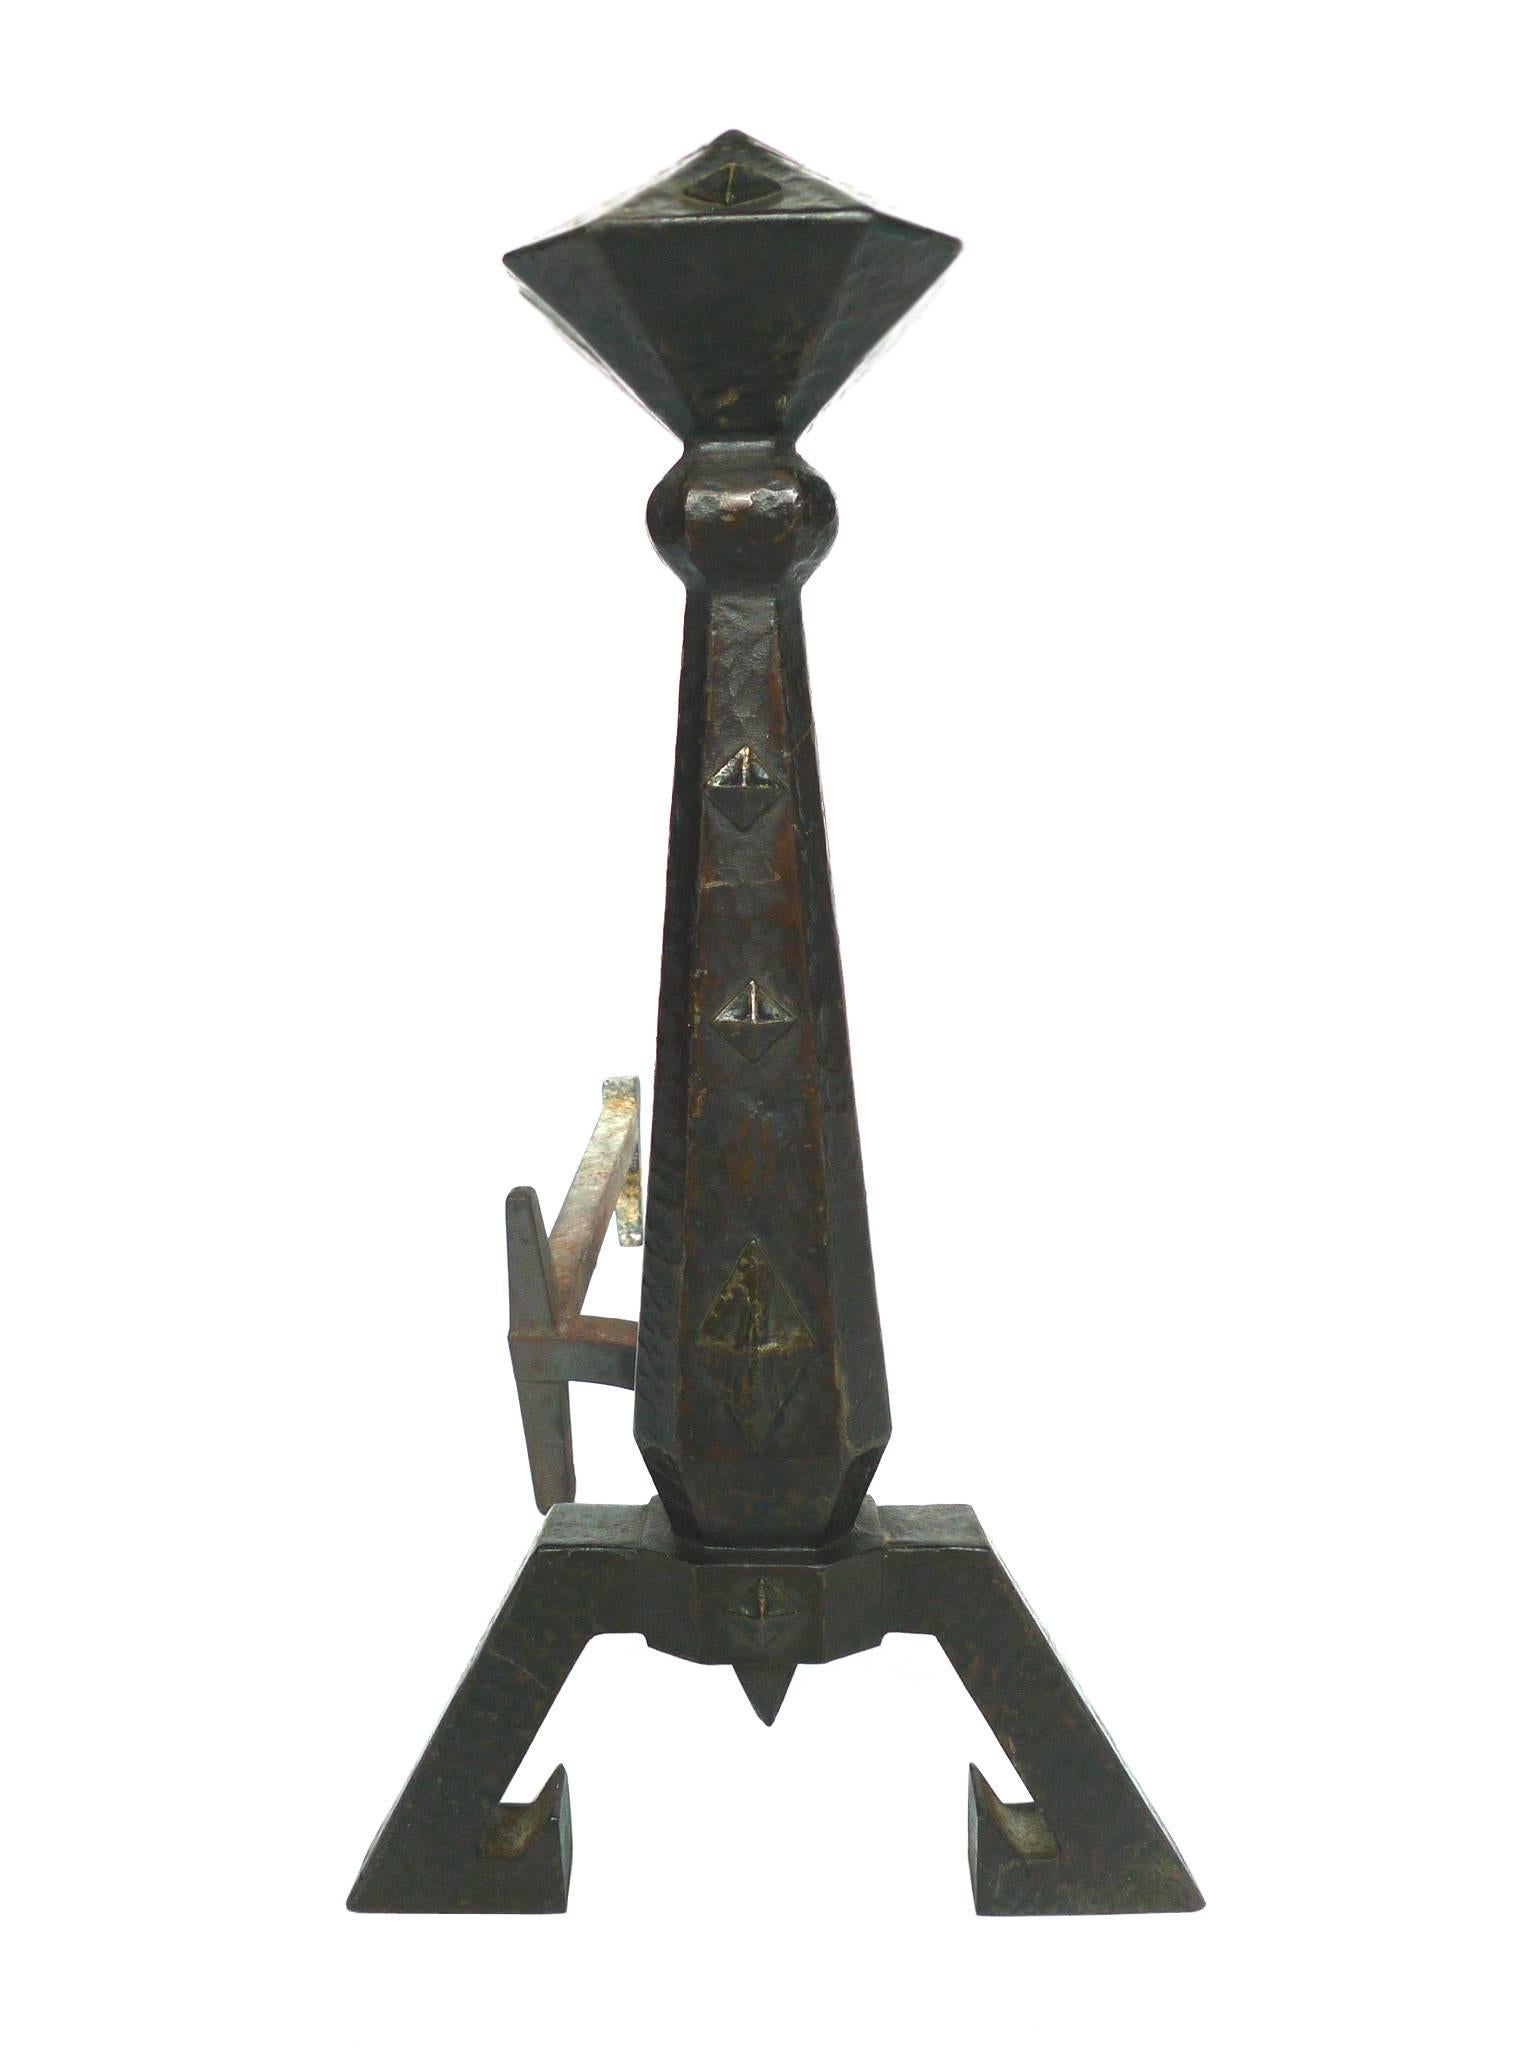 This cast-iron set includes a pair of andirons and one stand consisting of five tool pieces. The tools are for managing the fireplace and firewood. The set was expertly designed and crafted by the Bradley & Hubbard Manufacturing Company, which